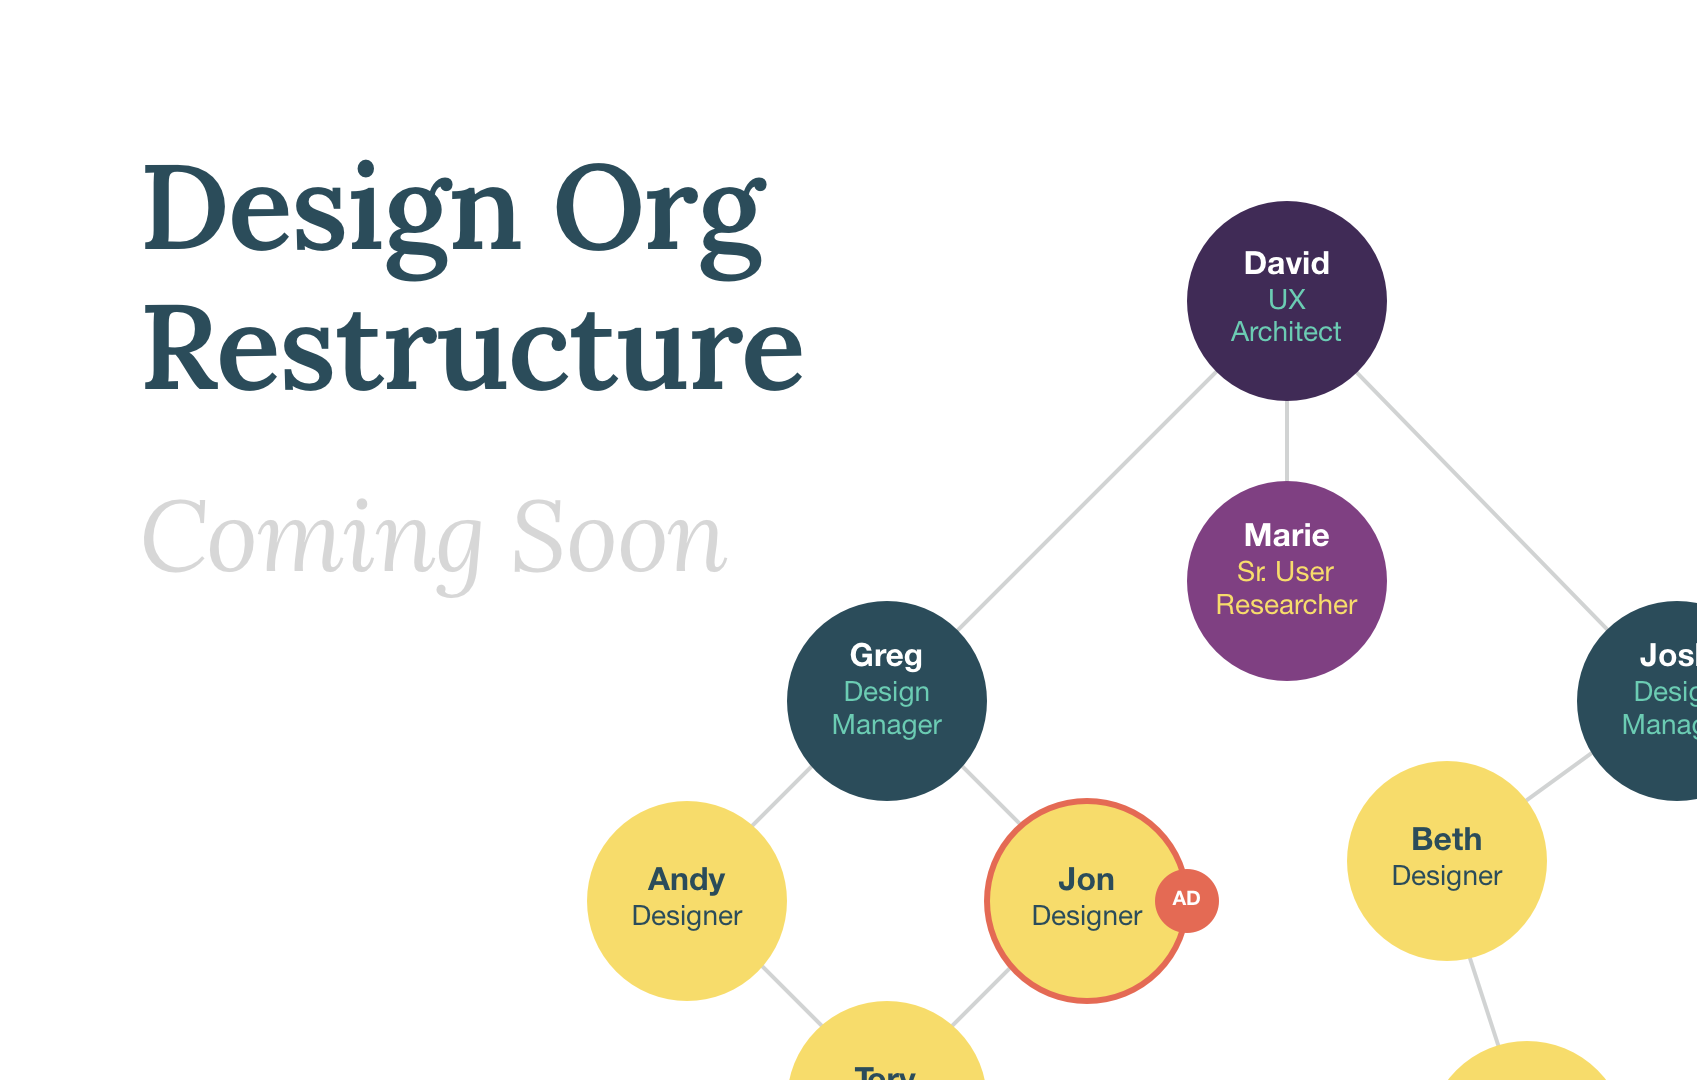 Design Org Restructure (Coming Soon)